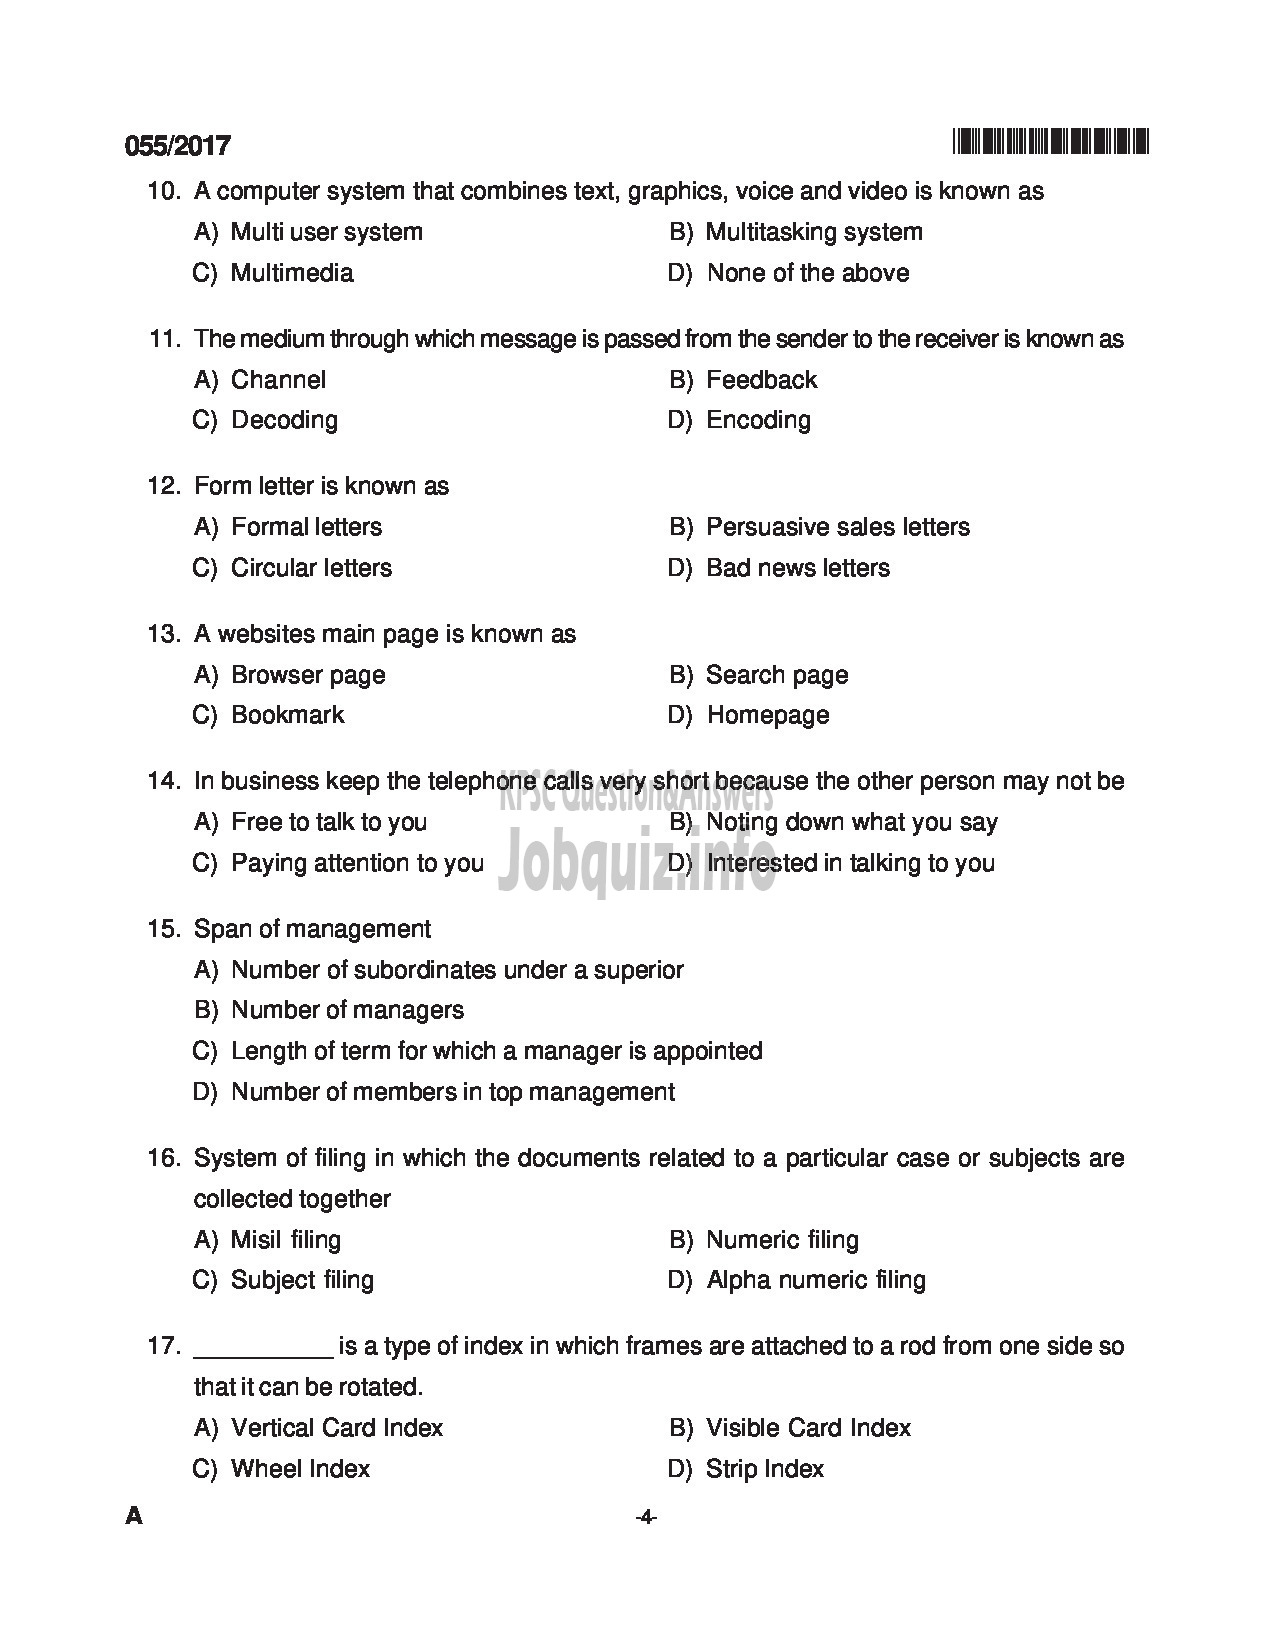 Kerala PSC Question Paper - INSTRUCTOR IN SECRETARIAL PRACTICE AND BM TECHNICAL EDUCATION QUESTION PAPER-4